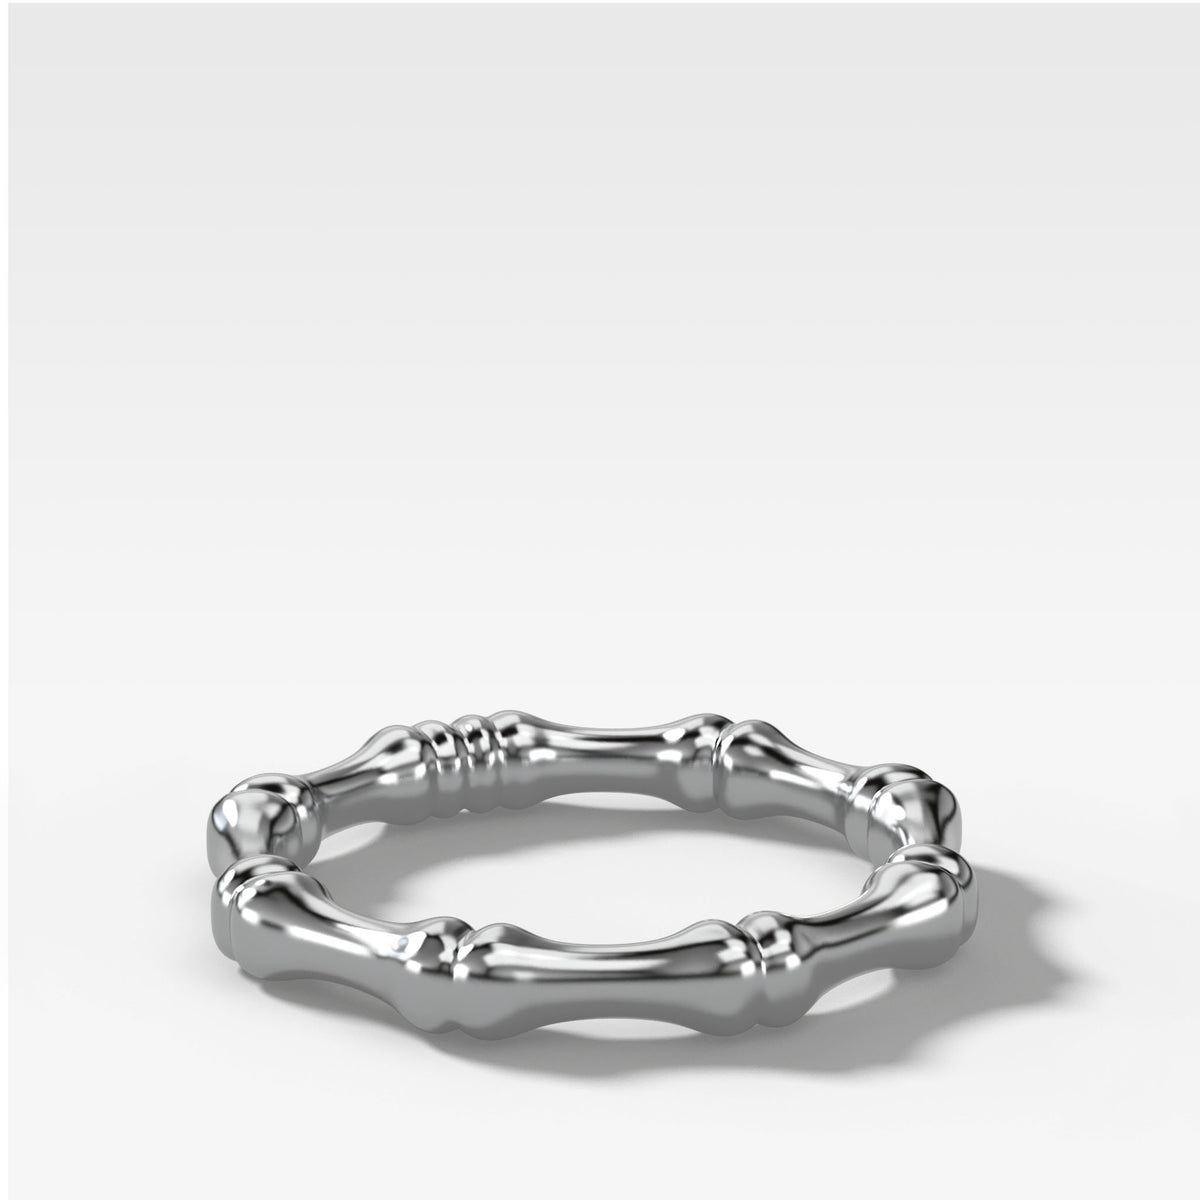 Bare Bones Stacker (3mm) Band by Good Stone in White Gold